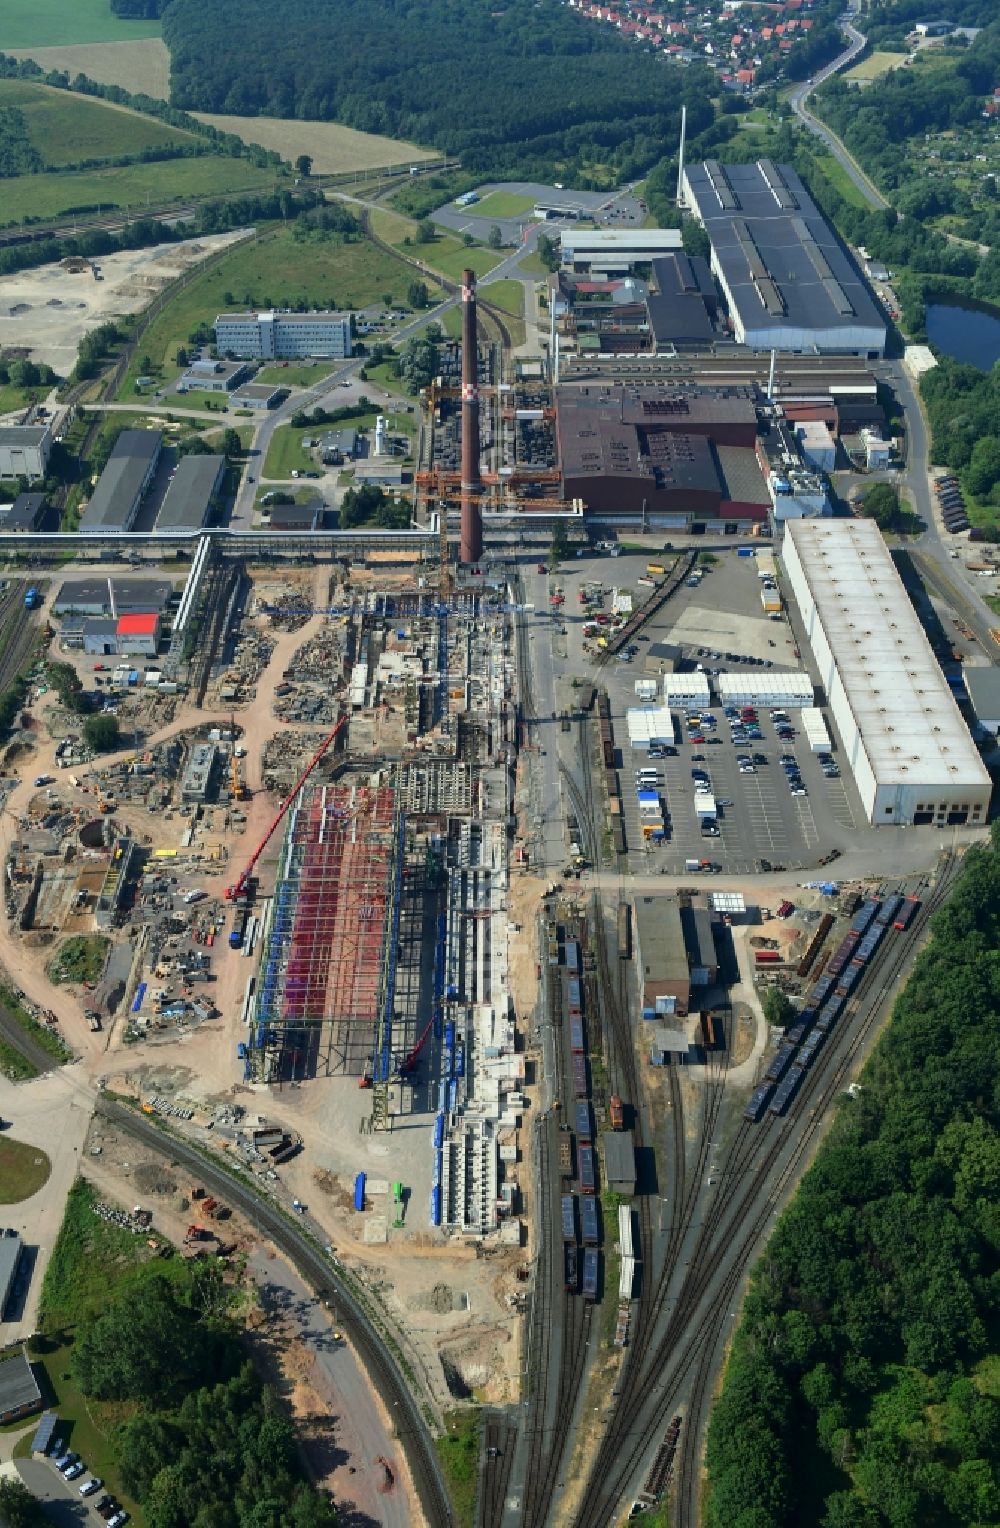 Aerial photograph Ilsenburg (Harz) - Construction site on building and production halls on the premises of Ilsenburger Grobblech GmbH in Ilsenburg (Harz) in the state Saxony-Anhalt, Germany